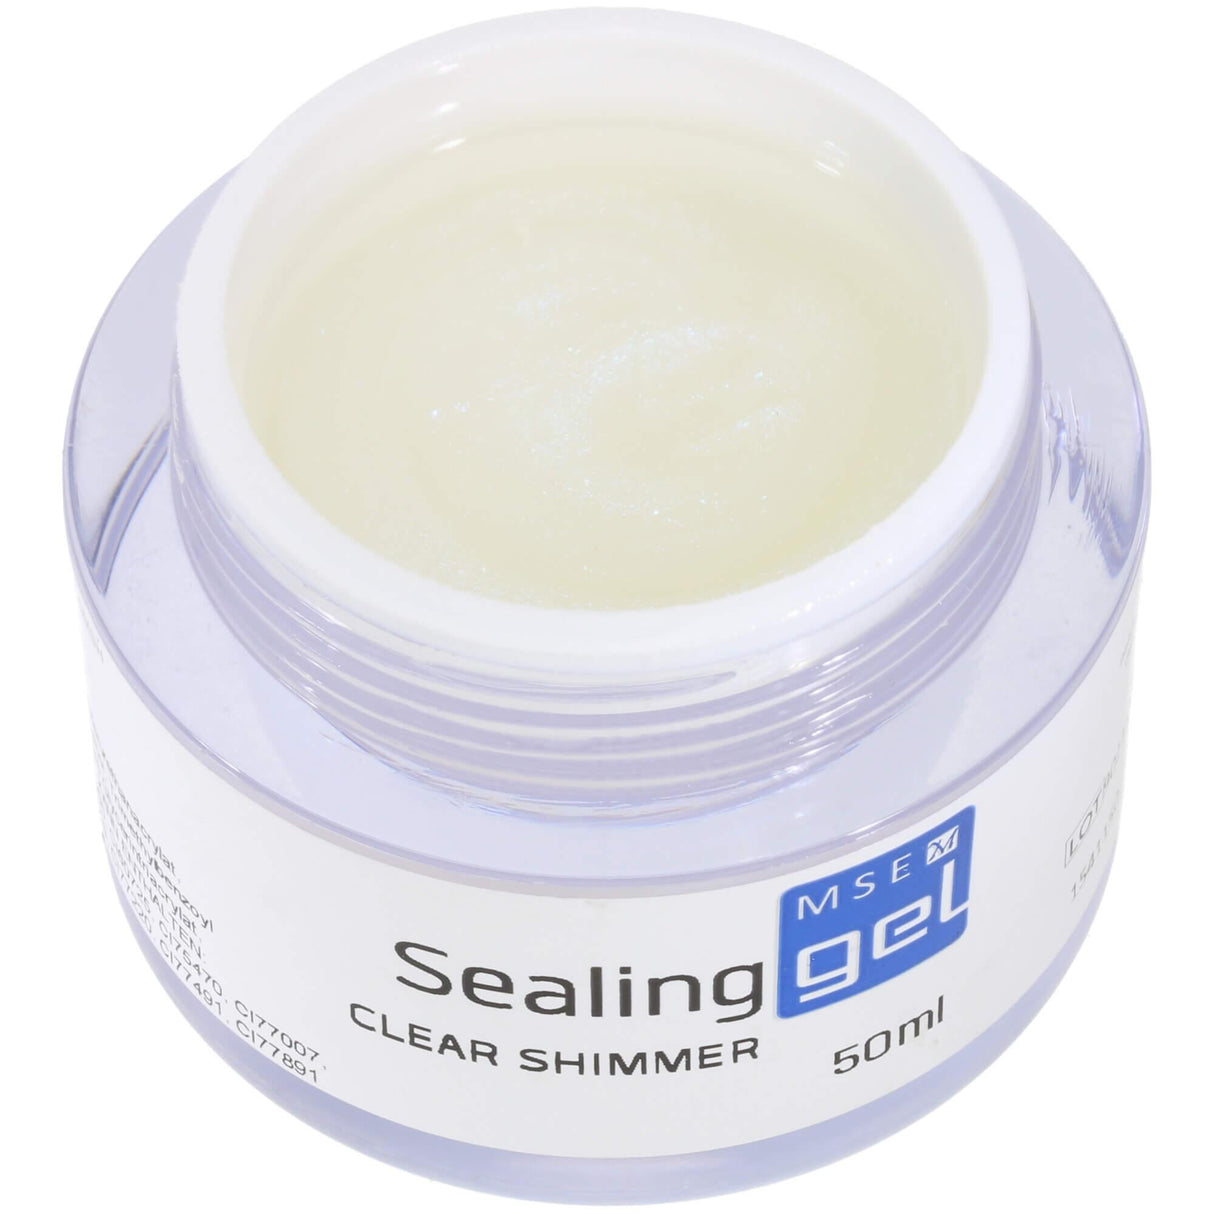 MSE Gel 411: Glanzgel Schimmer AB / Sealing clear shimmer 50ml - MSE - The Beauty Company